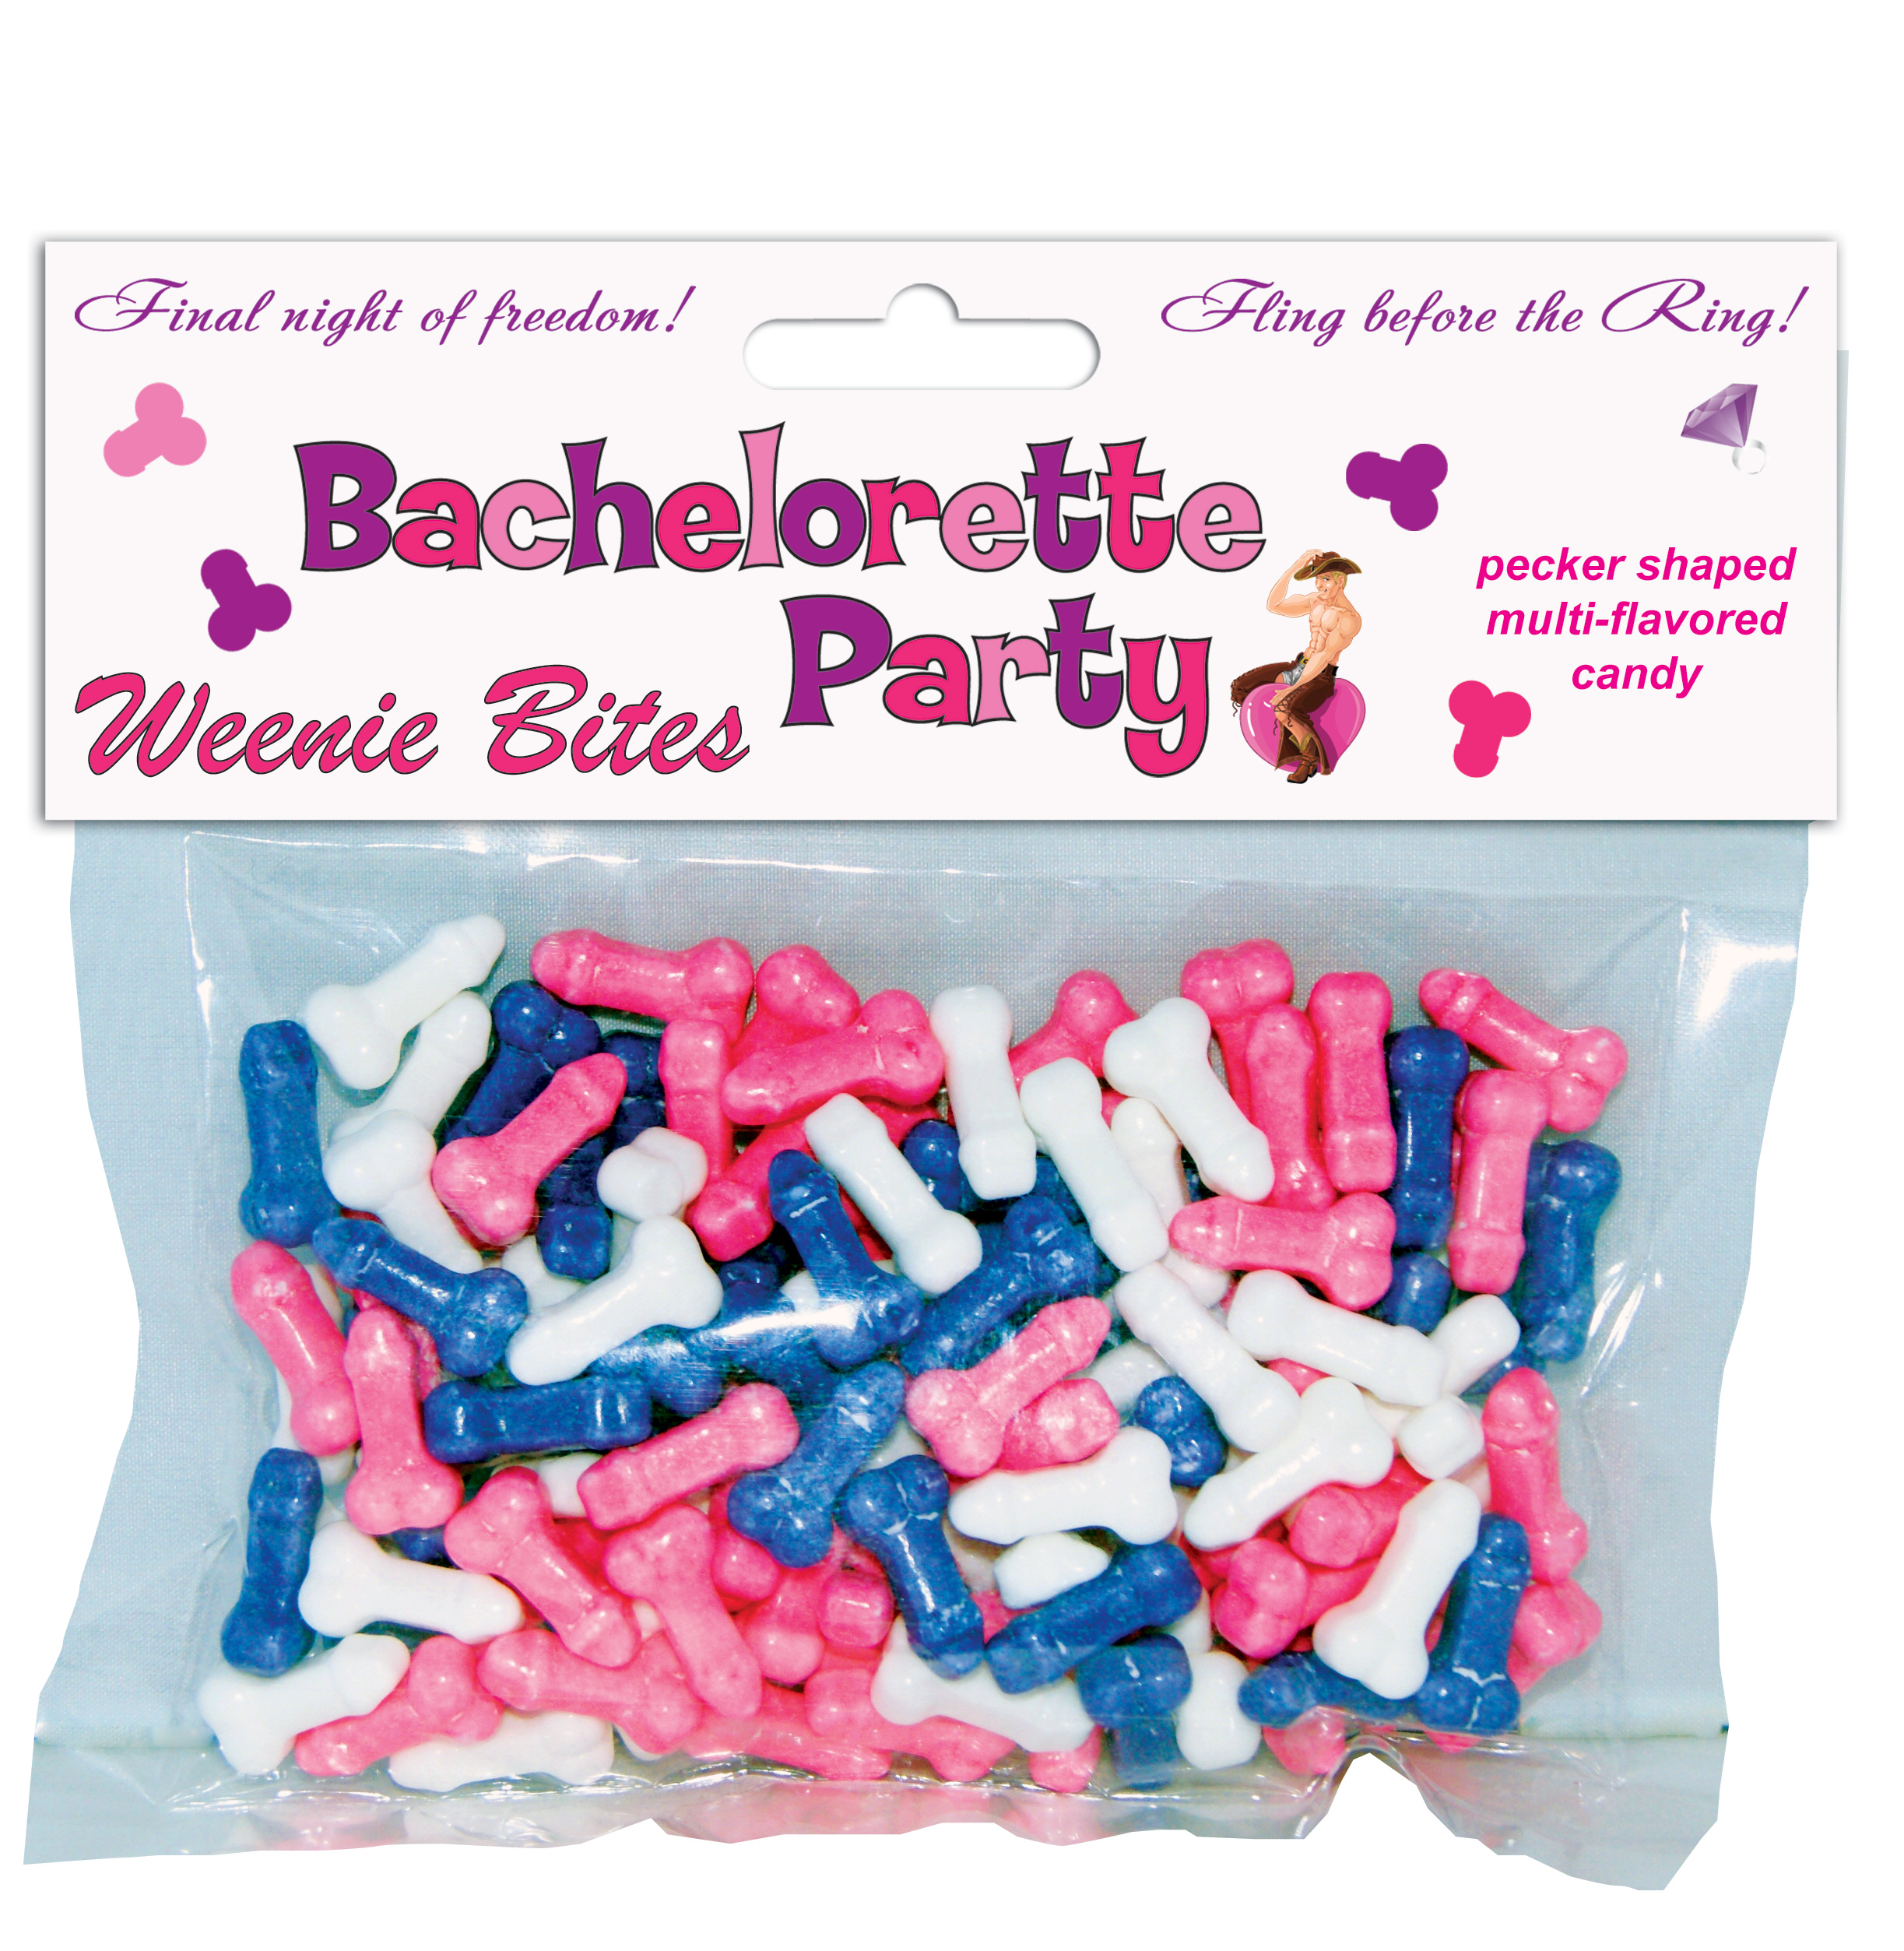 Bachelorette party weenie bites candy.